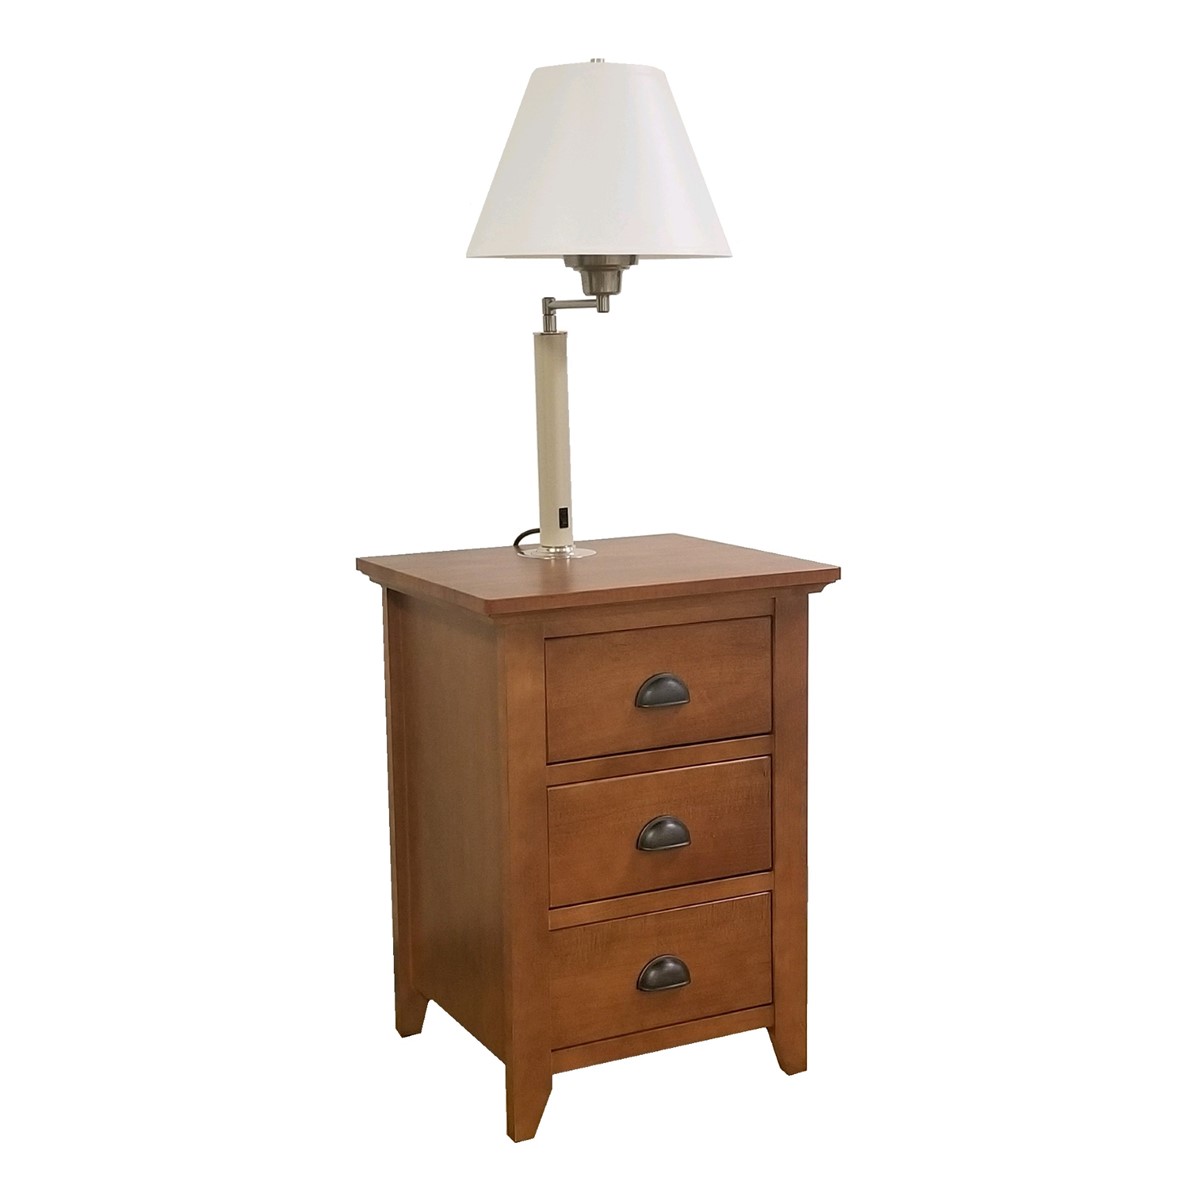 Custom Passages 3 Drawer Nightstand with Swing Arm Lamp